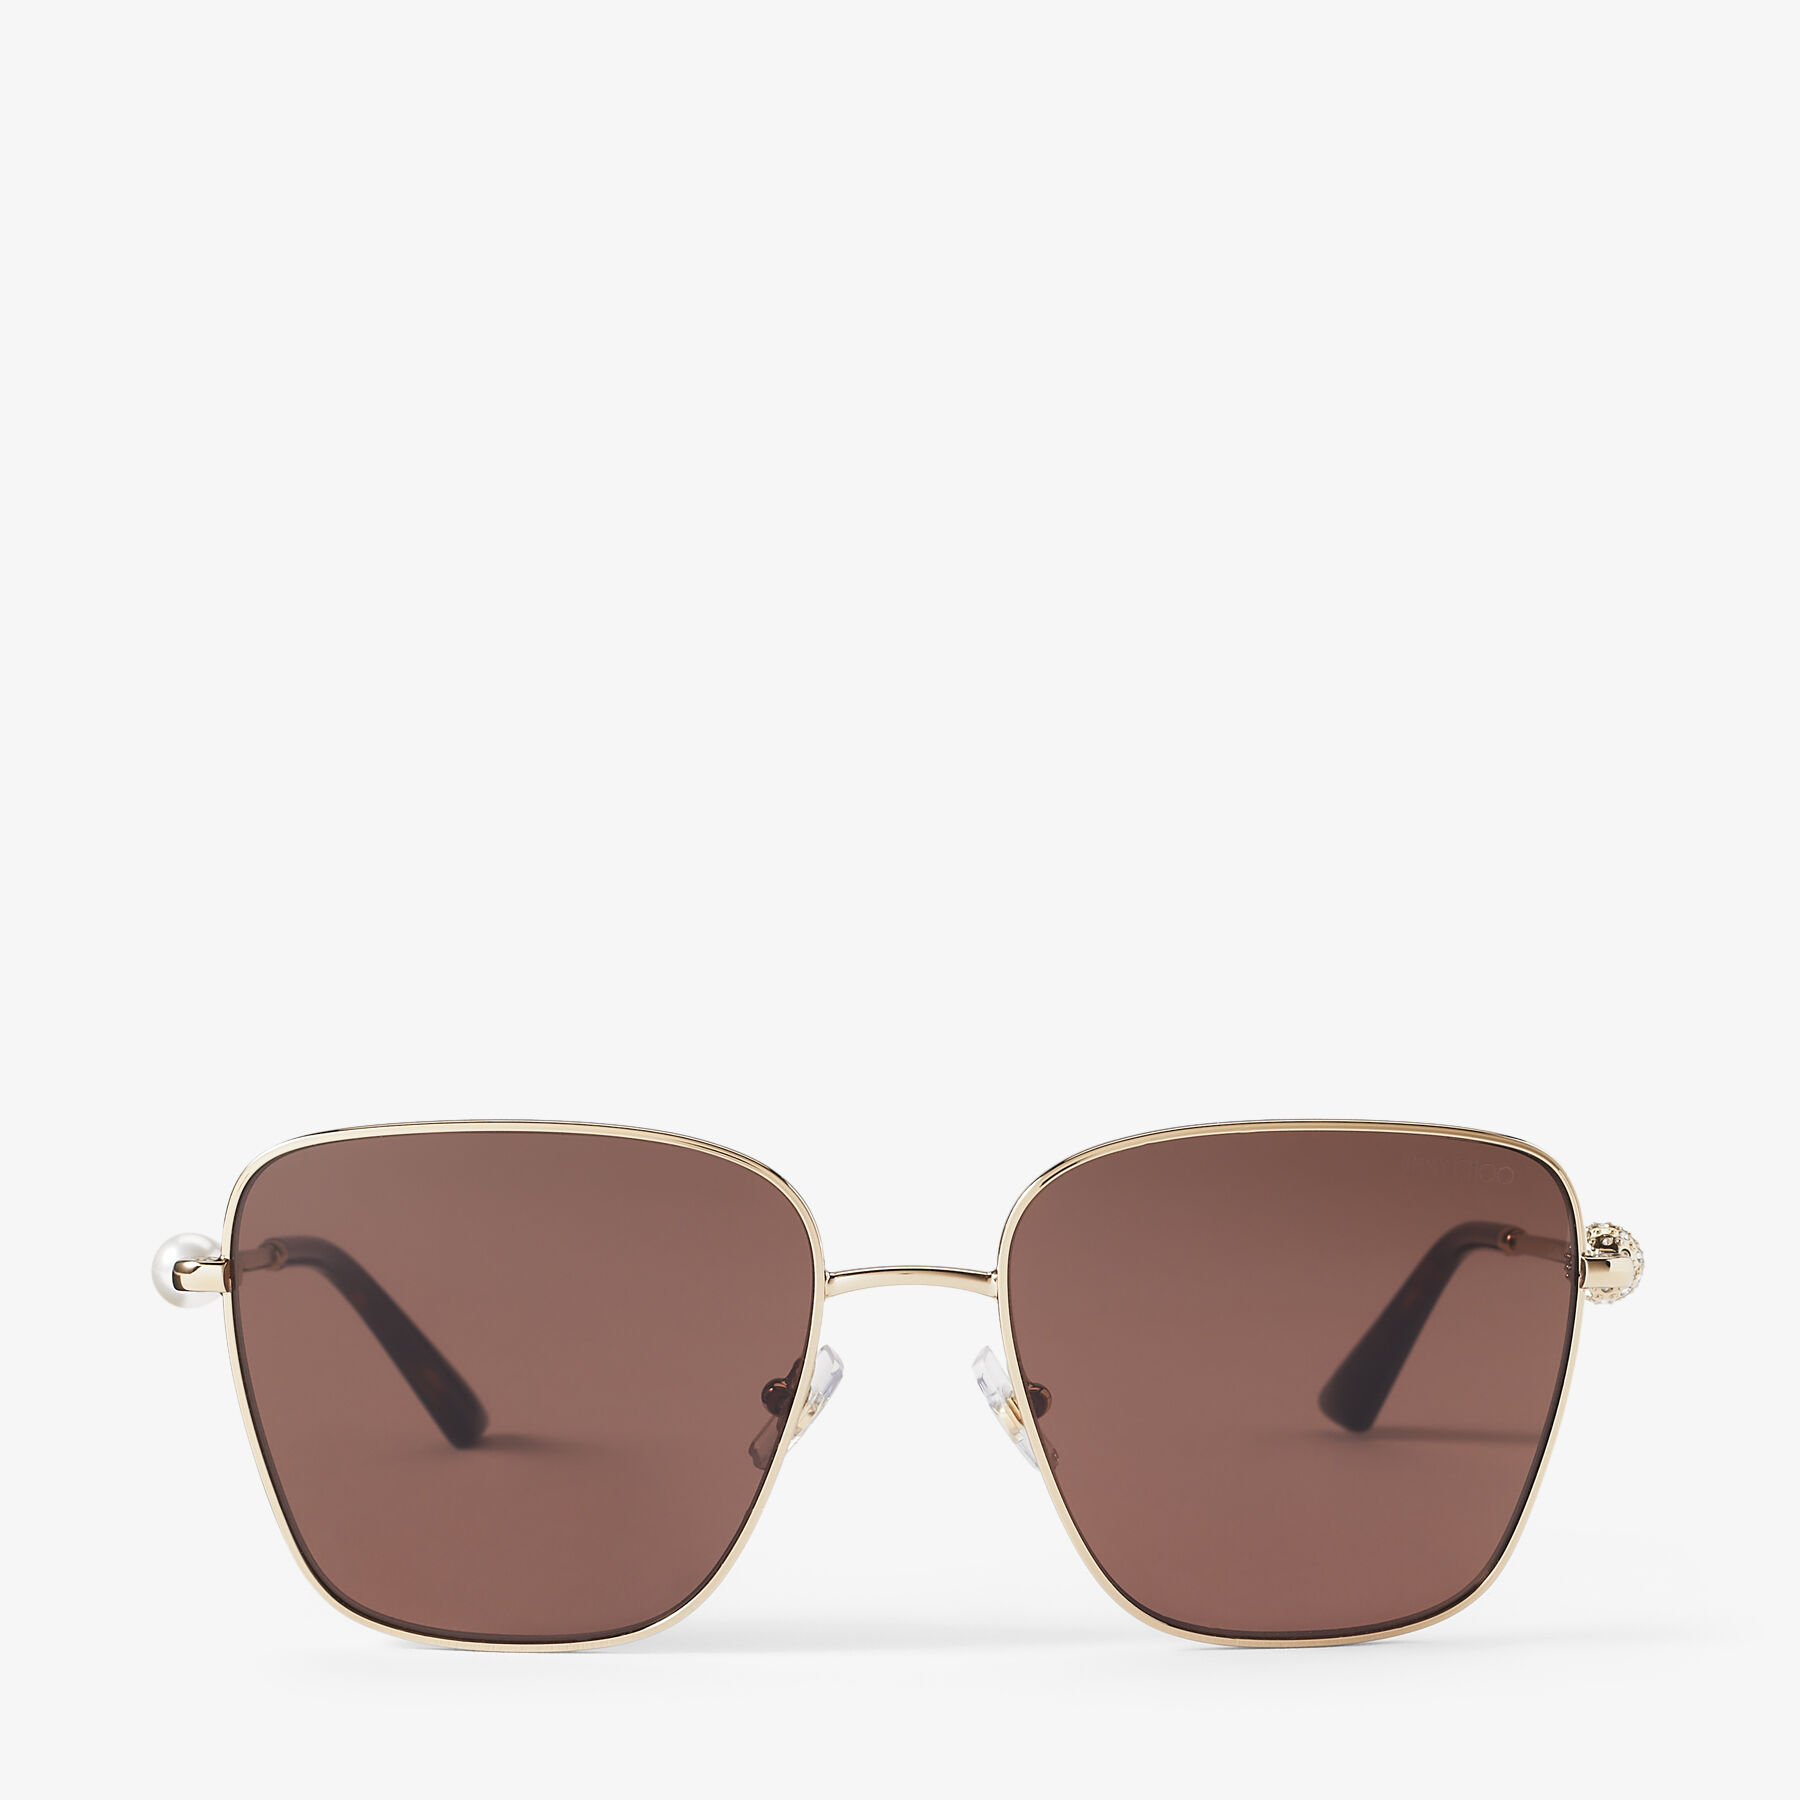 Pua | Pale Gold Square Sunglasses with Crystals | JIMMY CHOO